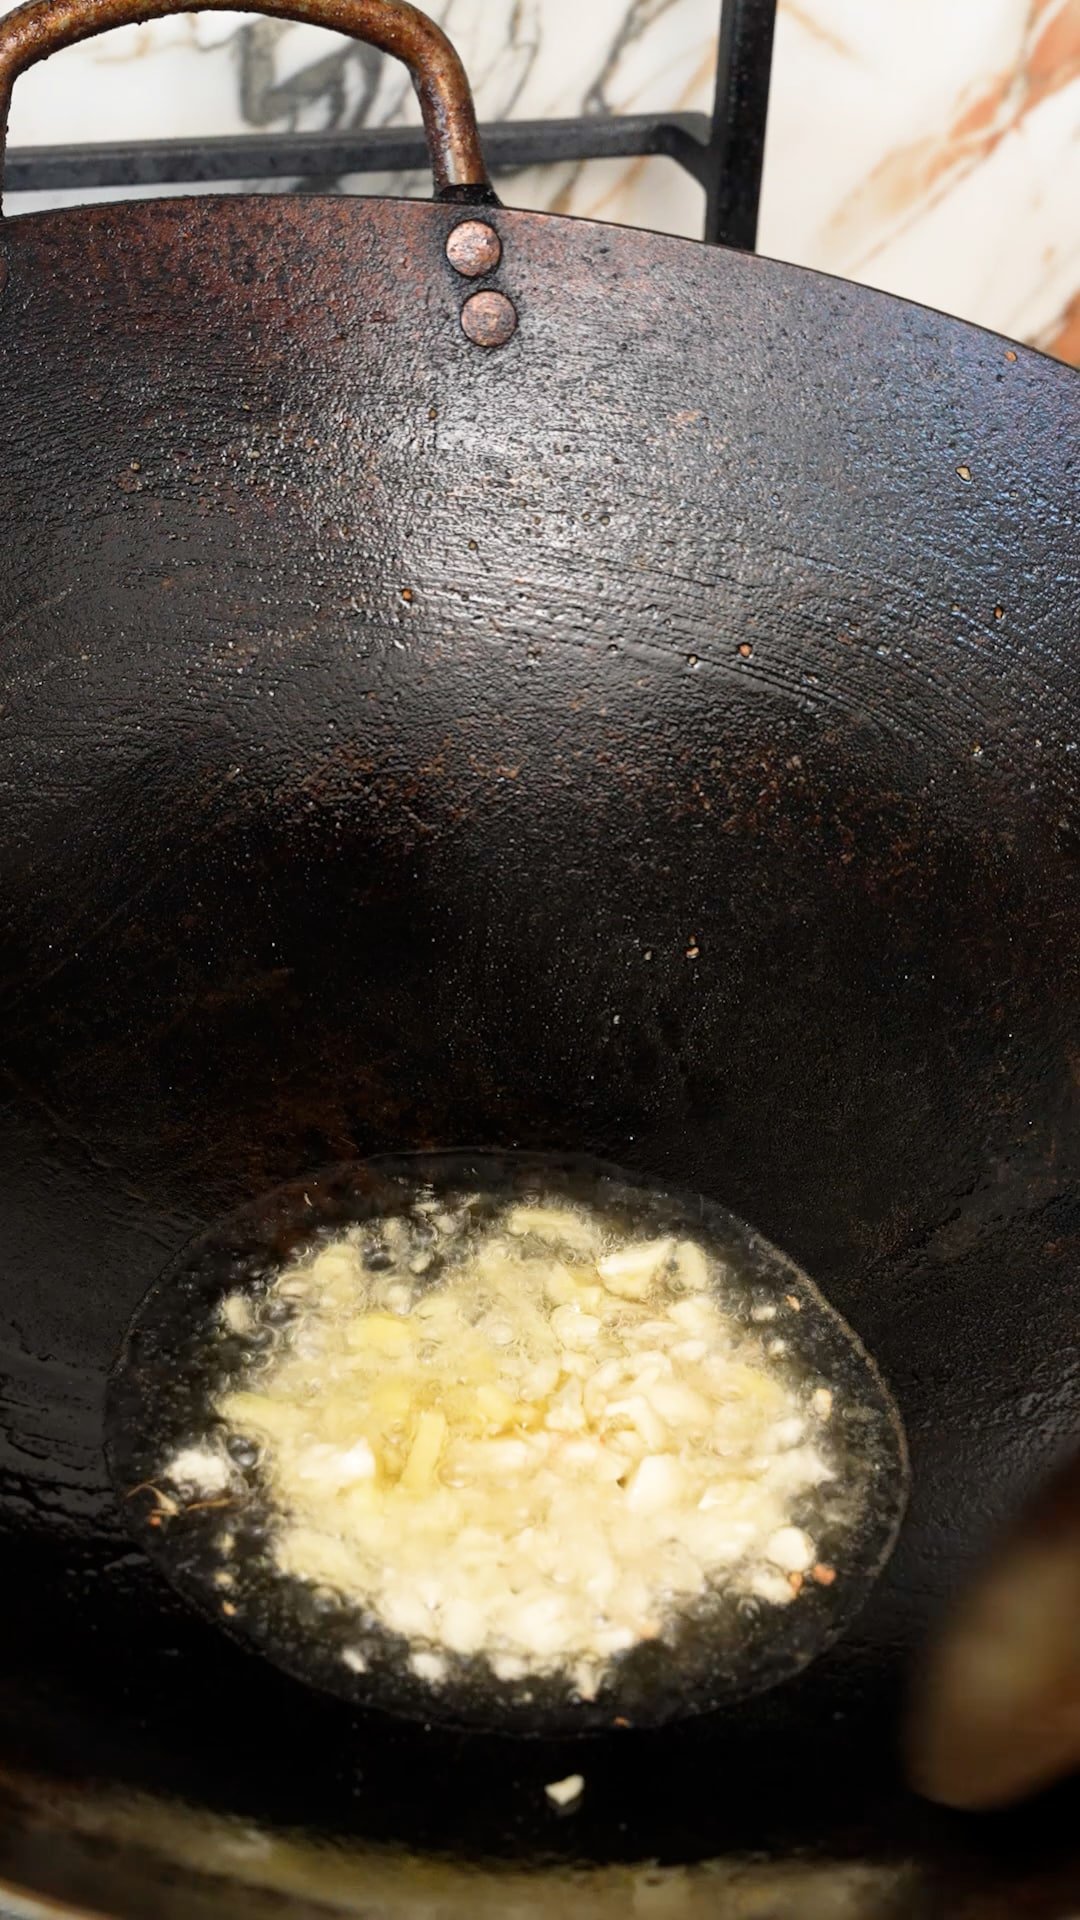 Garlic and ginger sauteing in oil in a wok.